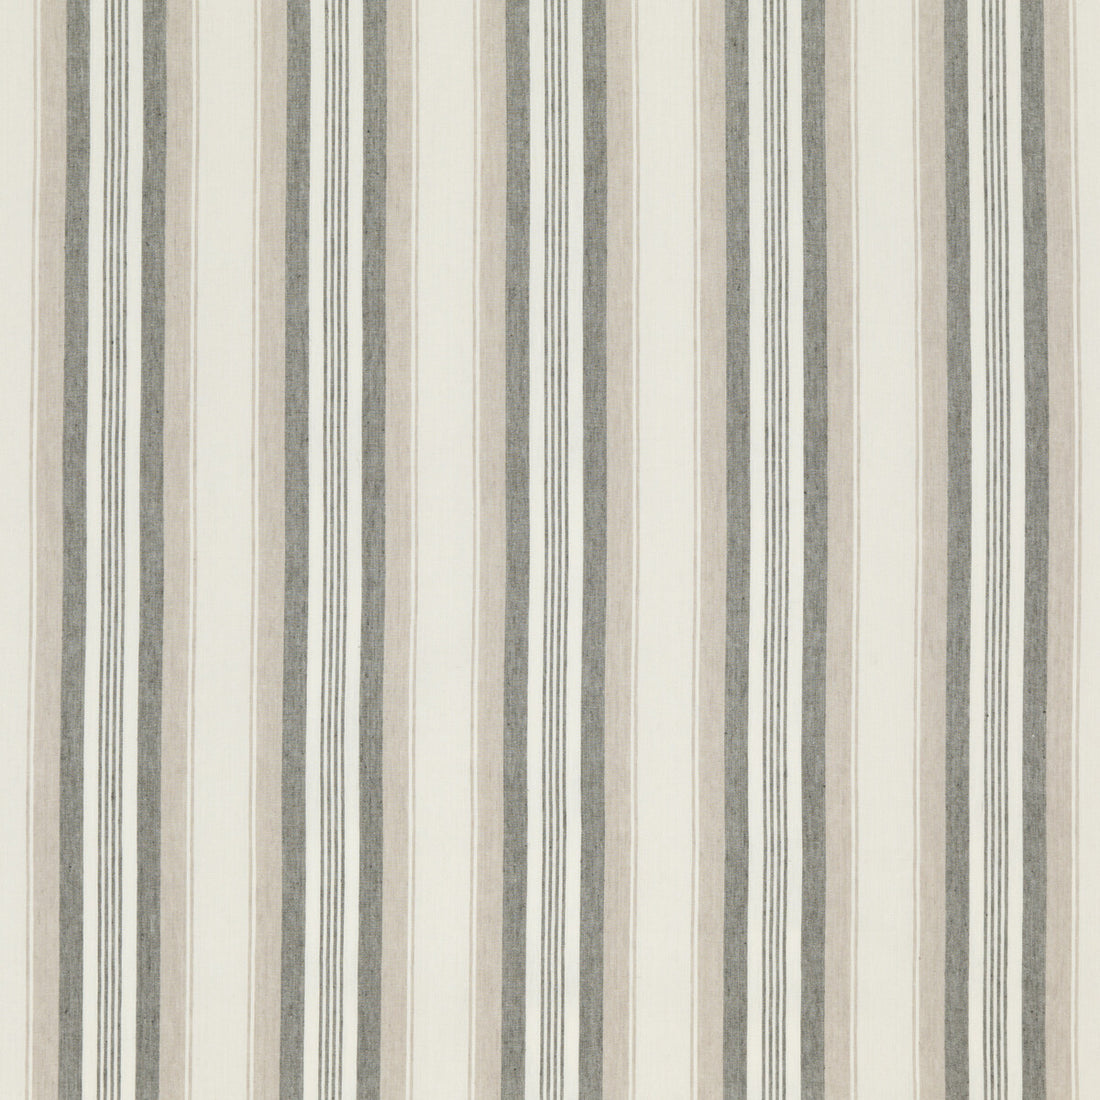 Lovisa fabric in taupe color - pattern ED85301.210.0 - by Threads in the Great Stripes collection